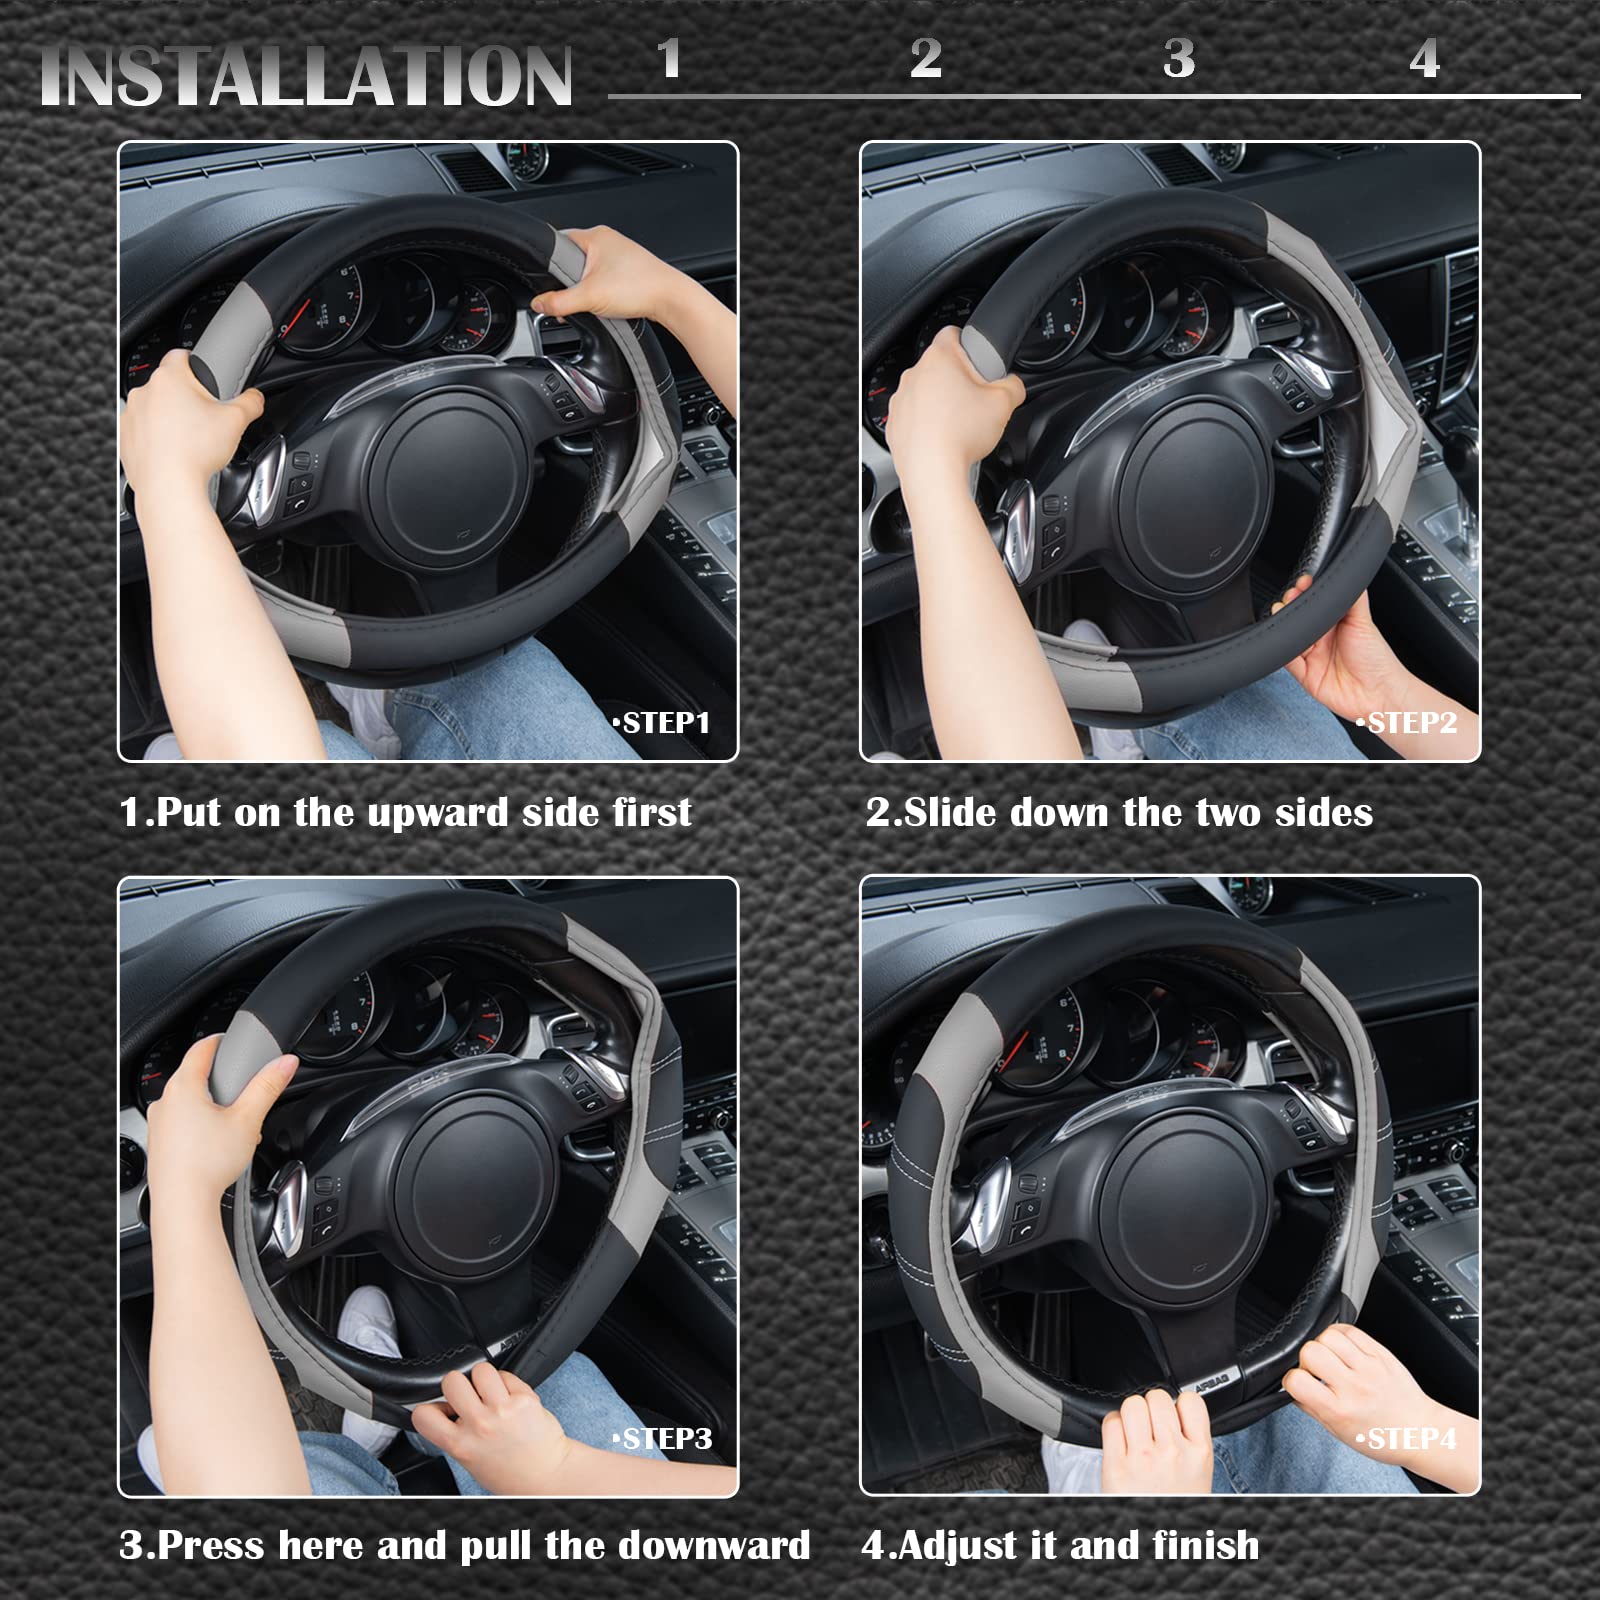 CAR PASS Line Rider Microfiber Leather Sporty Steering Wheel Cover Universal Fits for 95% Truck,SUV,Cars,14.5-15inch Anti-Slip Safety Comfortable Desgin (Black-Gray)